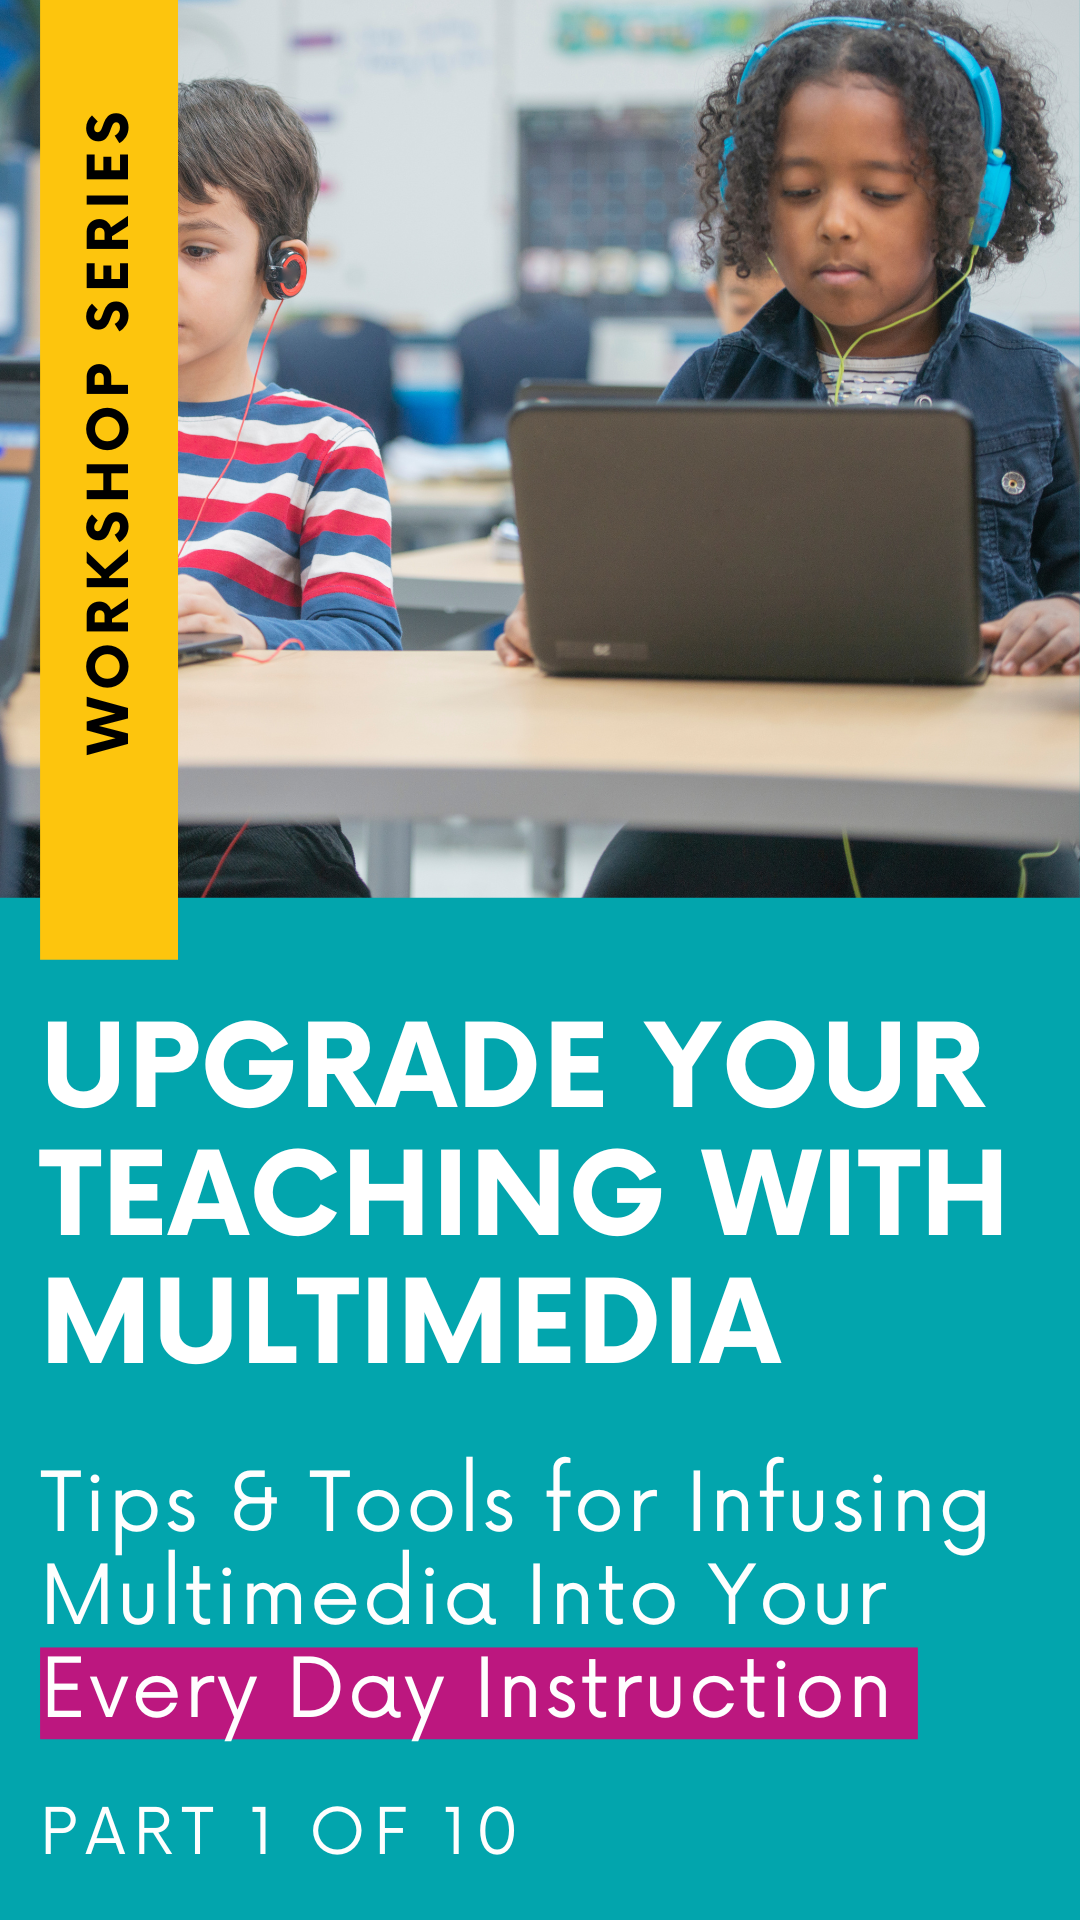 INTRODUCING: Upgrade Your Teaching - Tips & Tools for Infusing Multimedia Into Your Every Day Instruction Workshop Series (Copy)